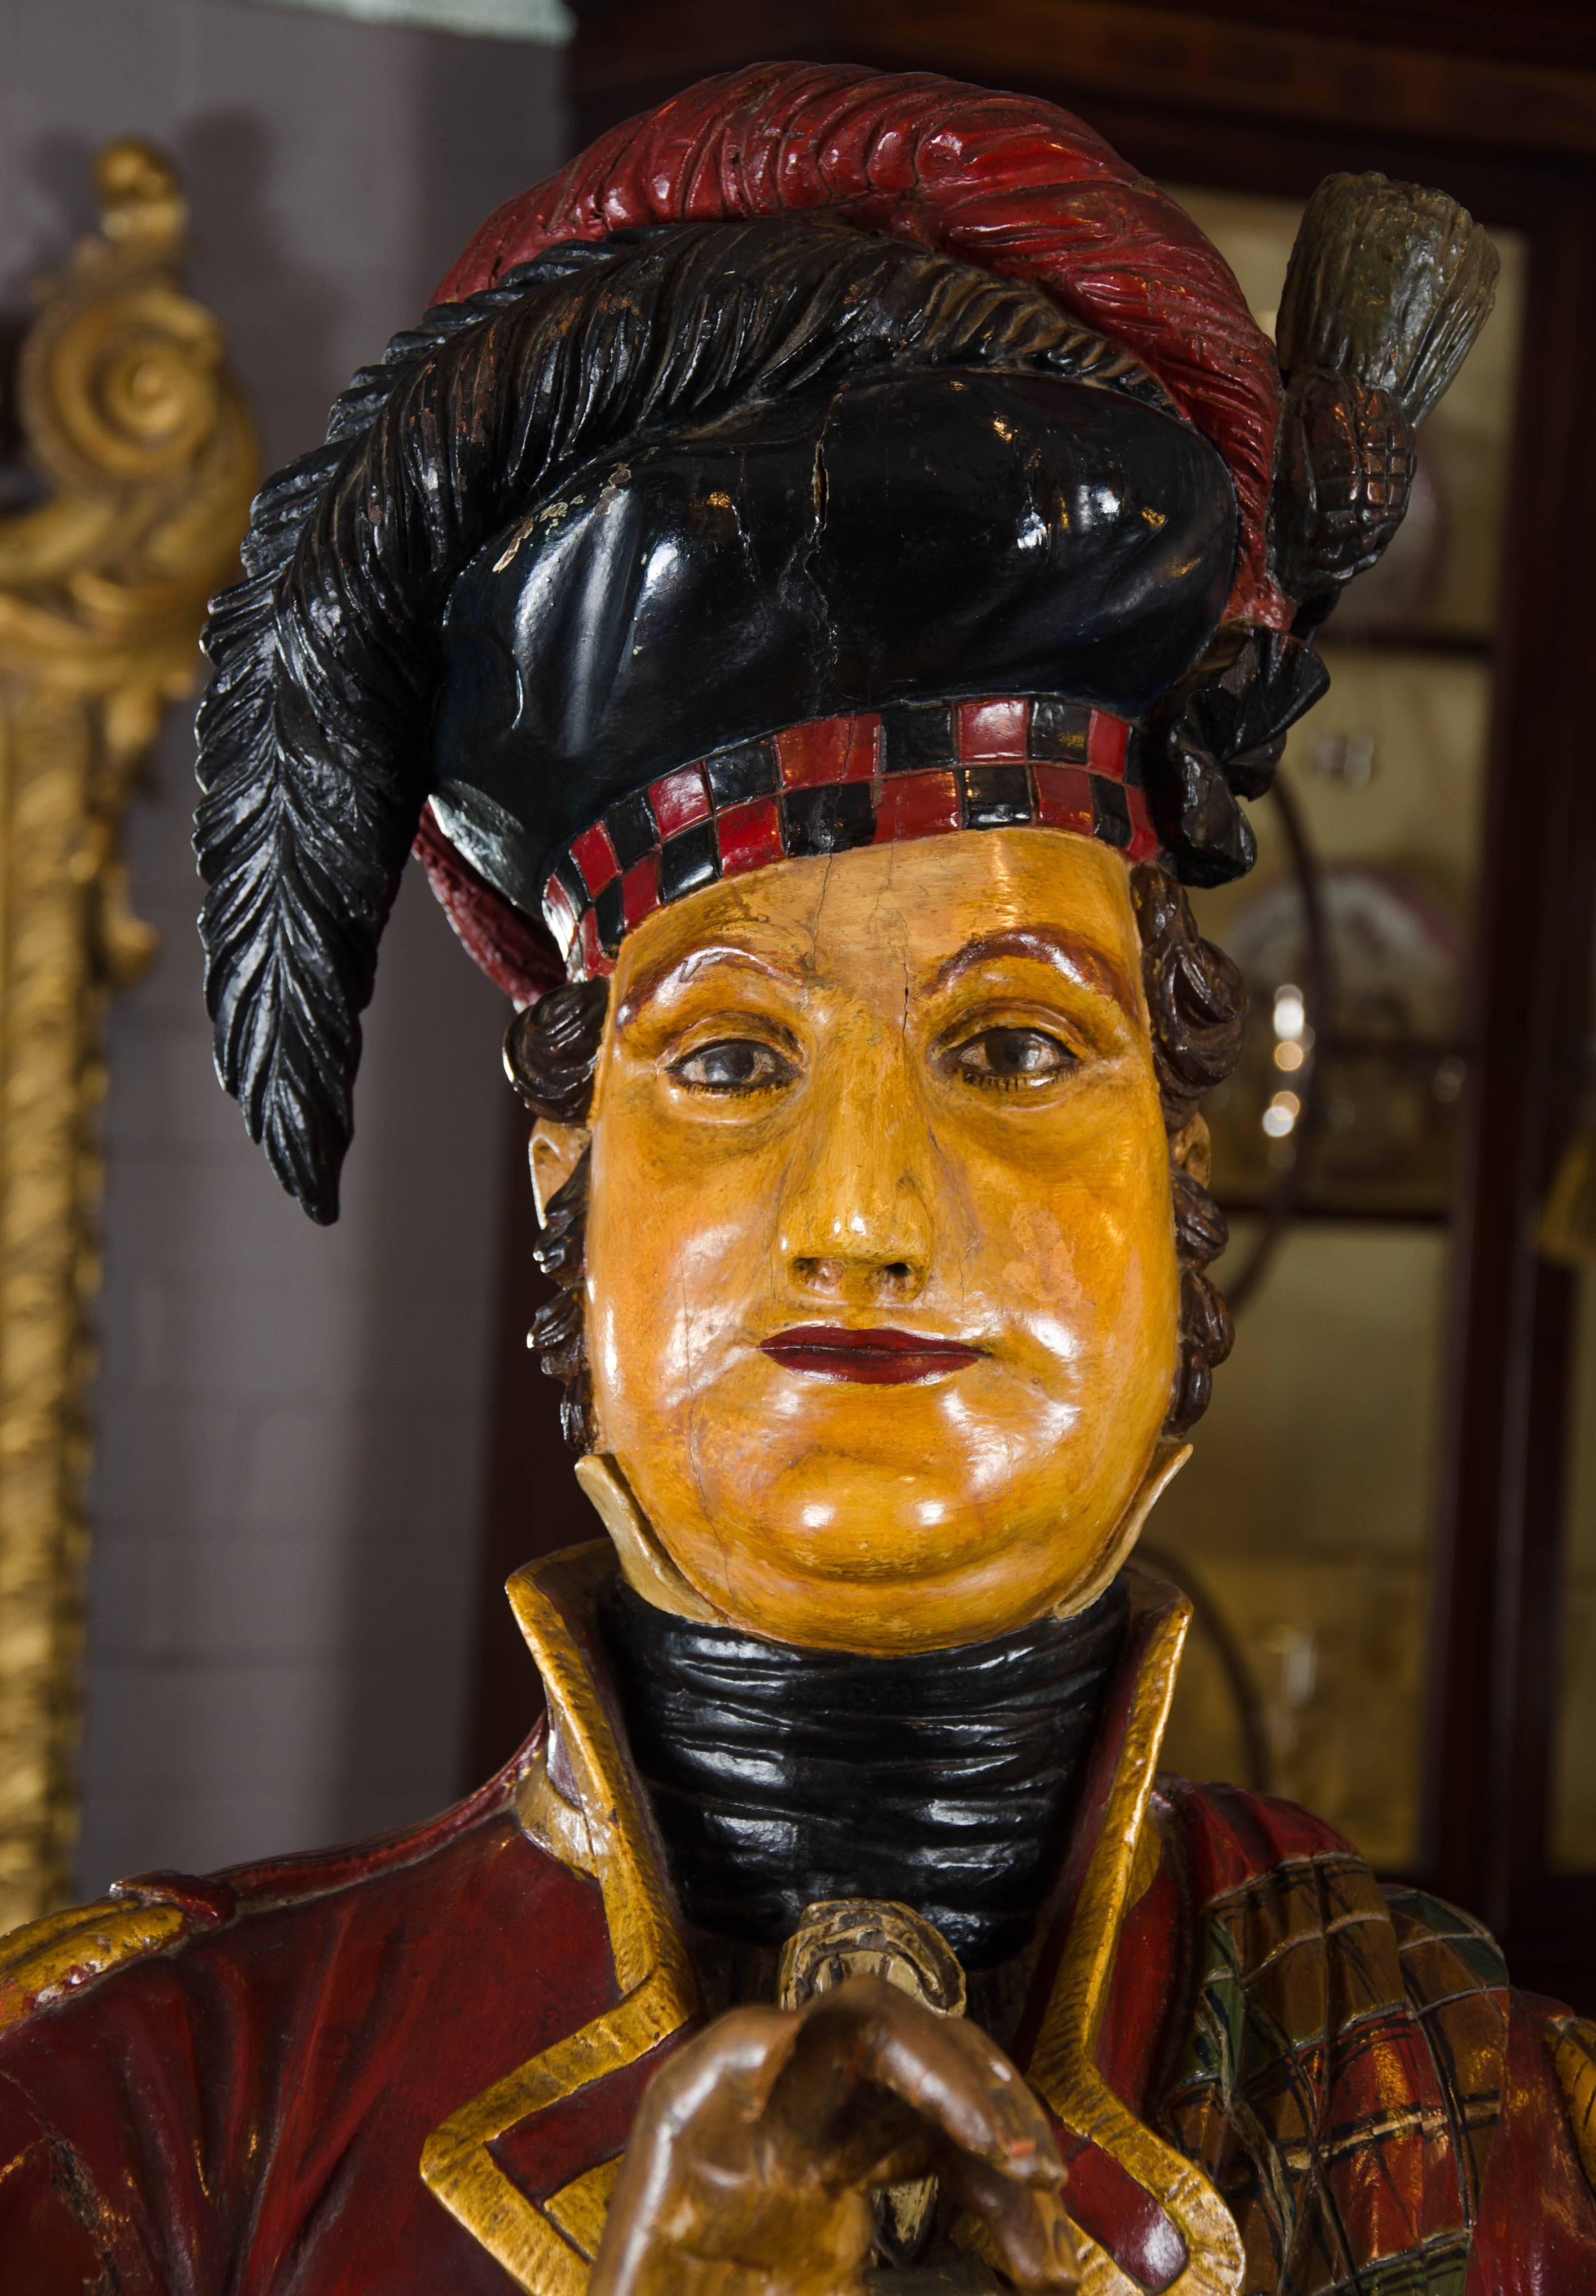 This rare life-size carved and polychrome painted tobacconist's figure is in the form of a Scottish Highlander taking snuff.

The original of this particular Highland model reputedly stood outside a tobacconist in Edinburgh, circa 1720 to signify